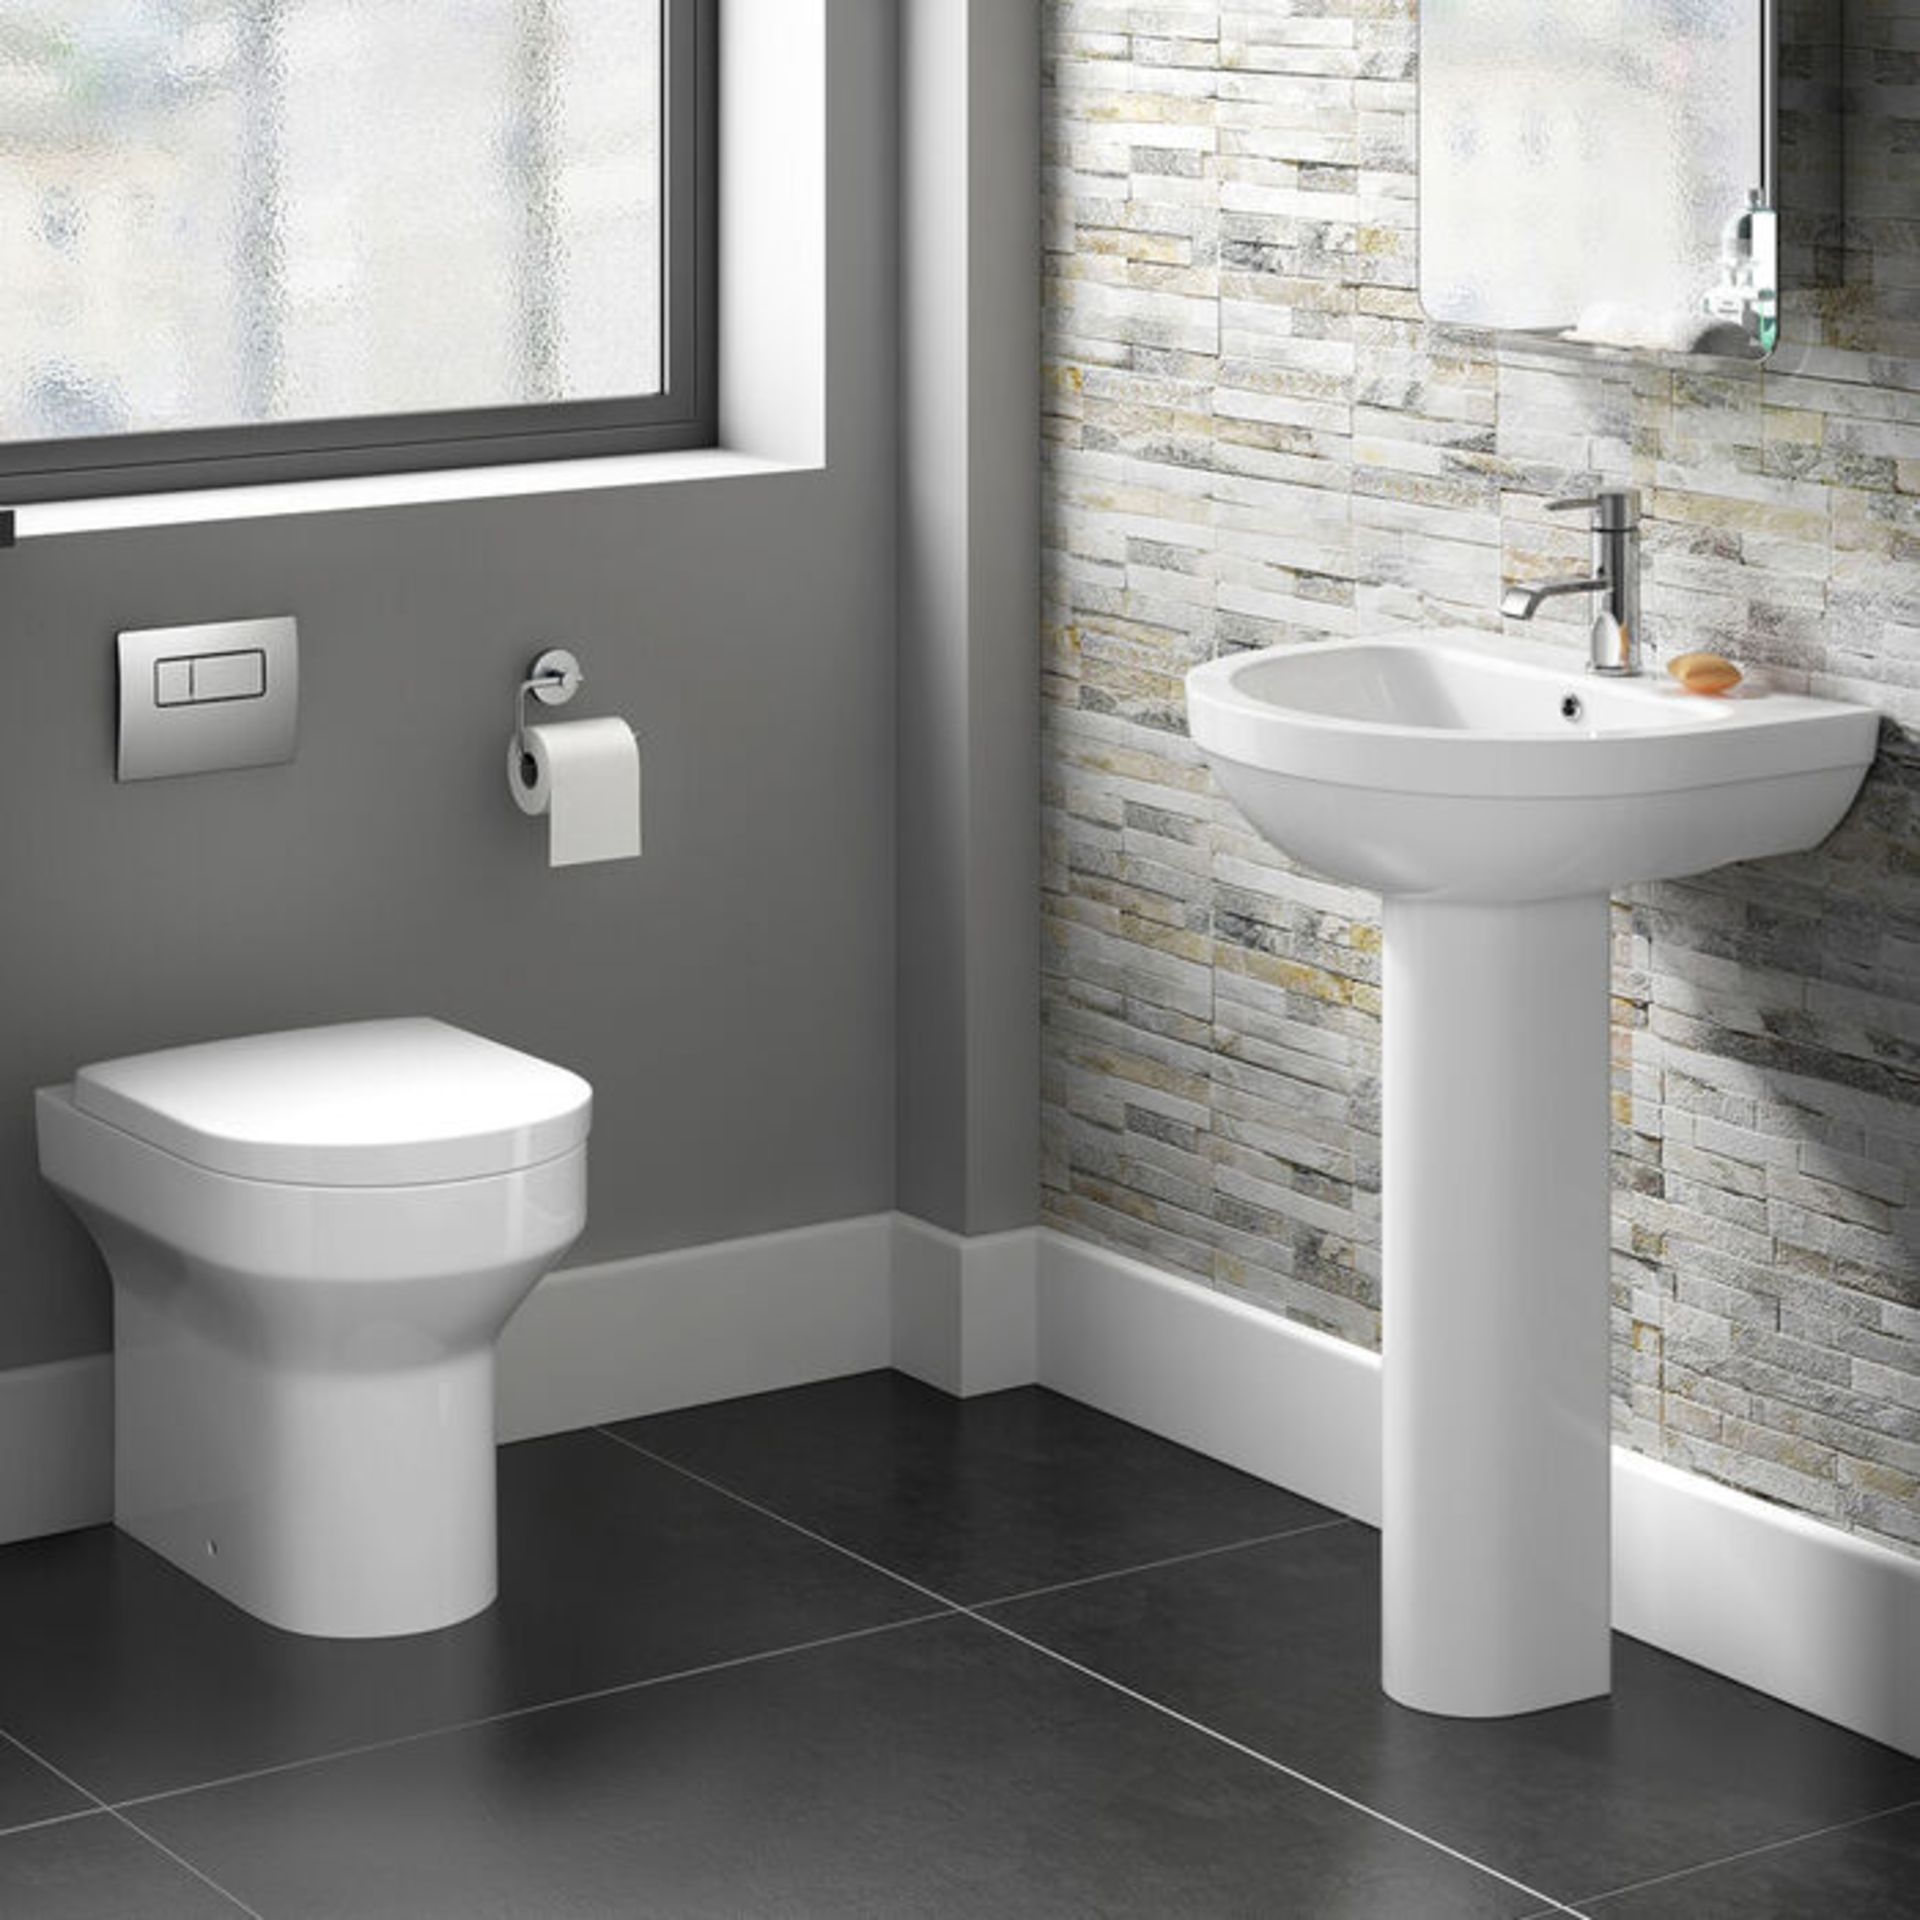 NEW & BOXED Cesar Back to Wall Toilet inc Soft Close Seat. 621BWP Made from White Vitreous China - Image 2 of 2